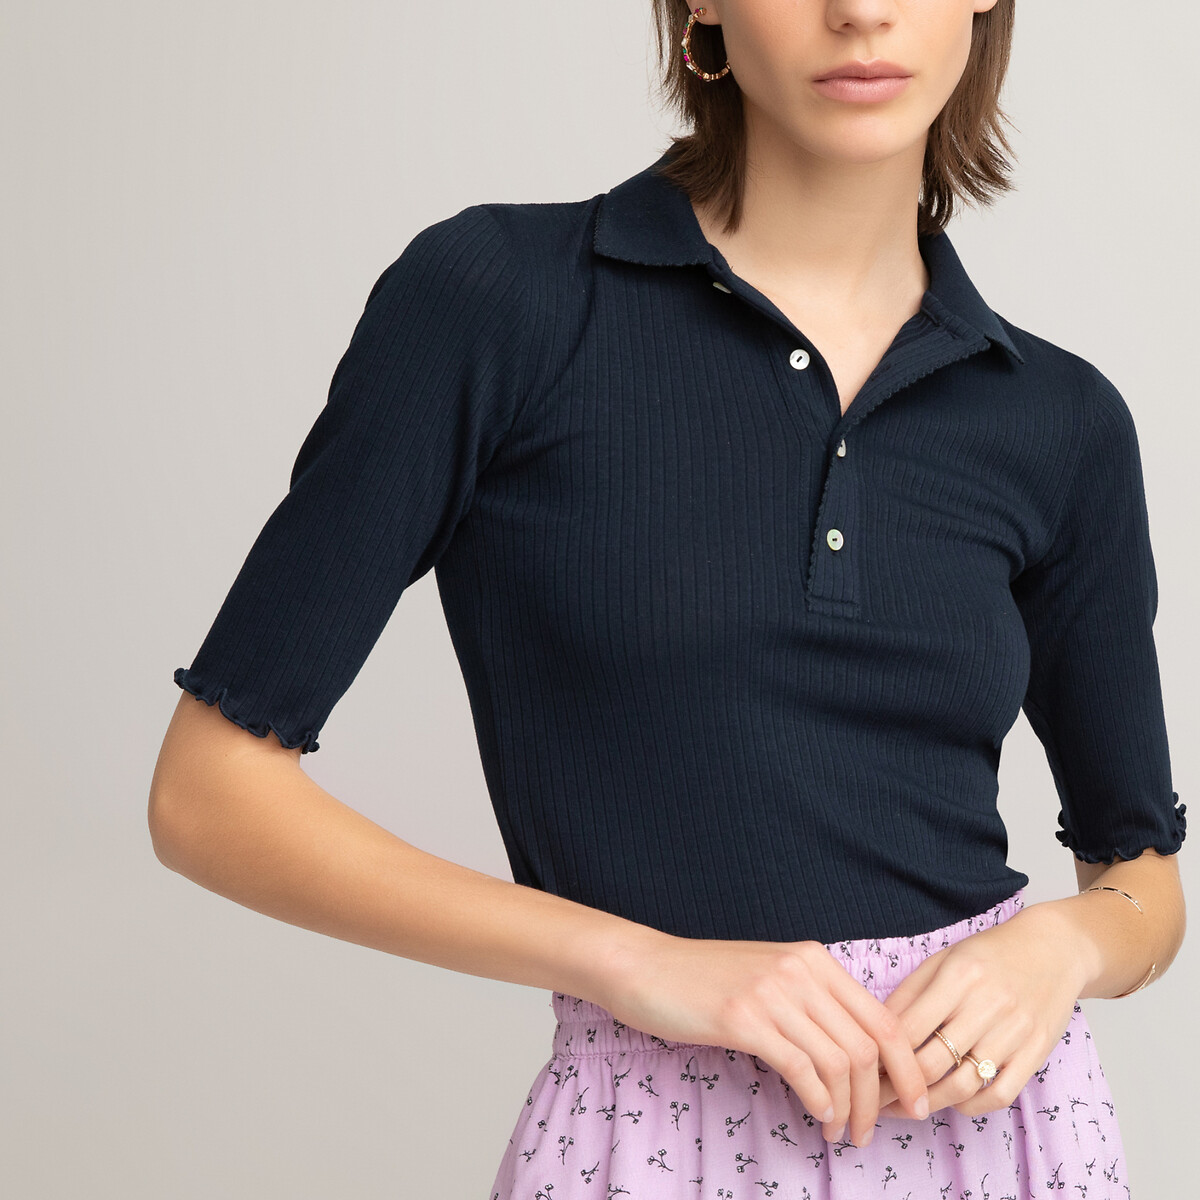 Ribbed polo shirt with short sleeves, navy blue, La Redoute Collections